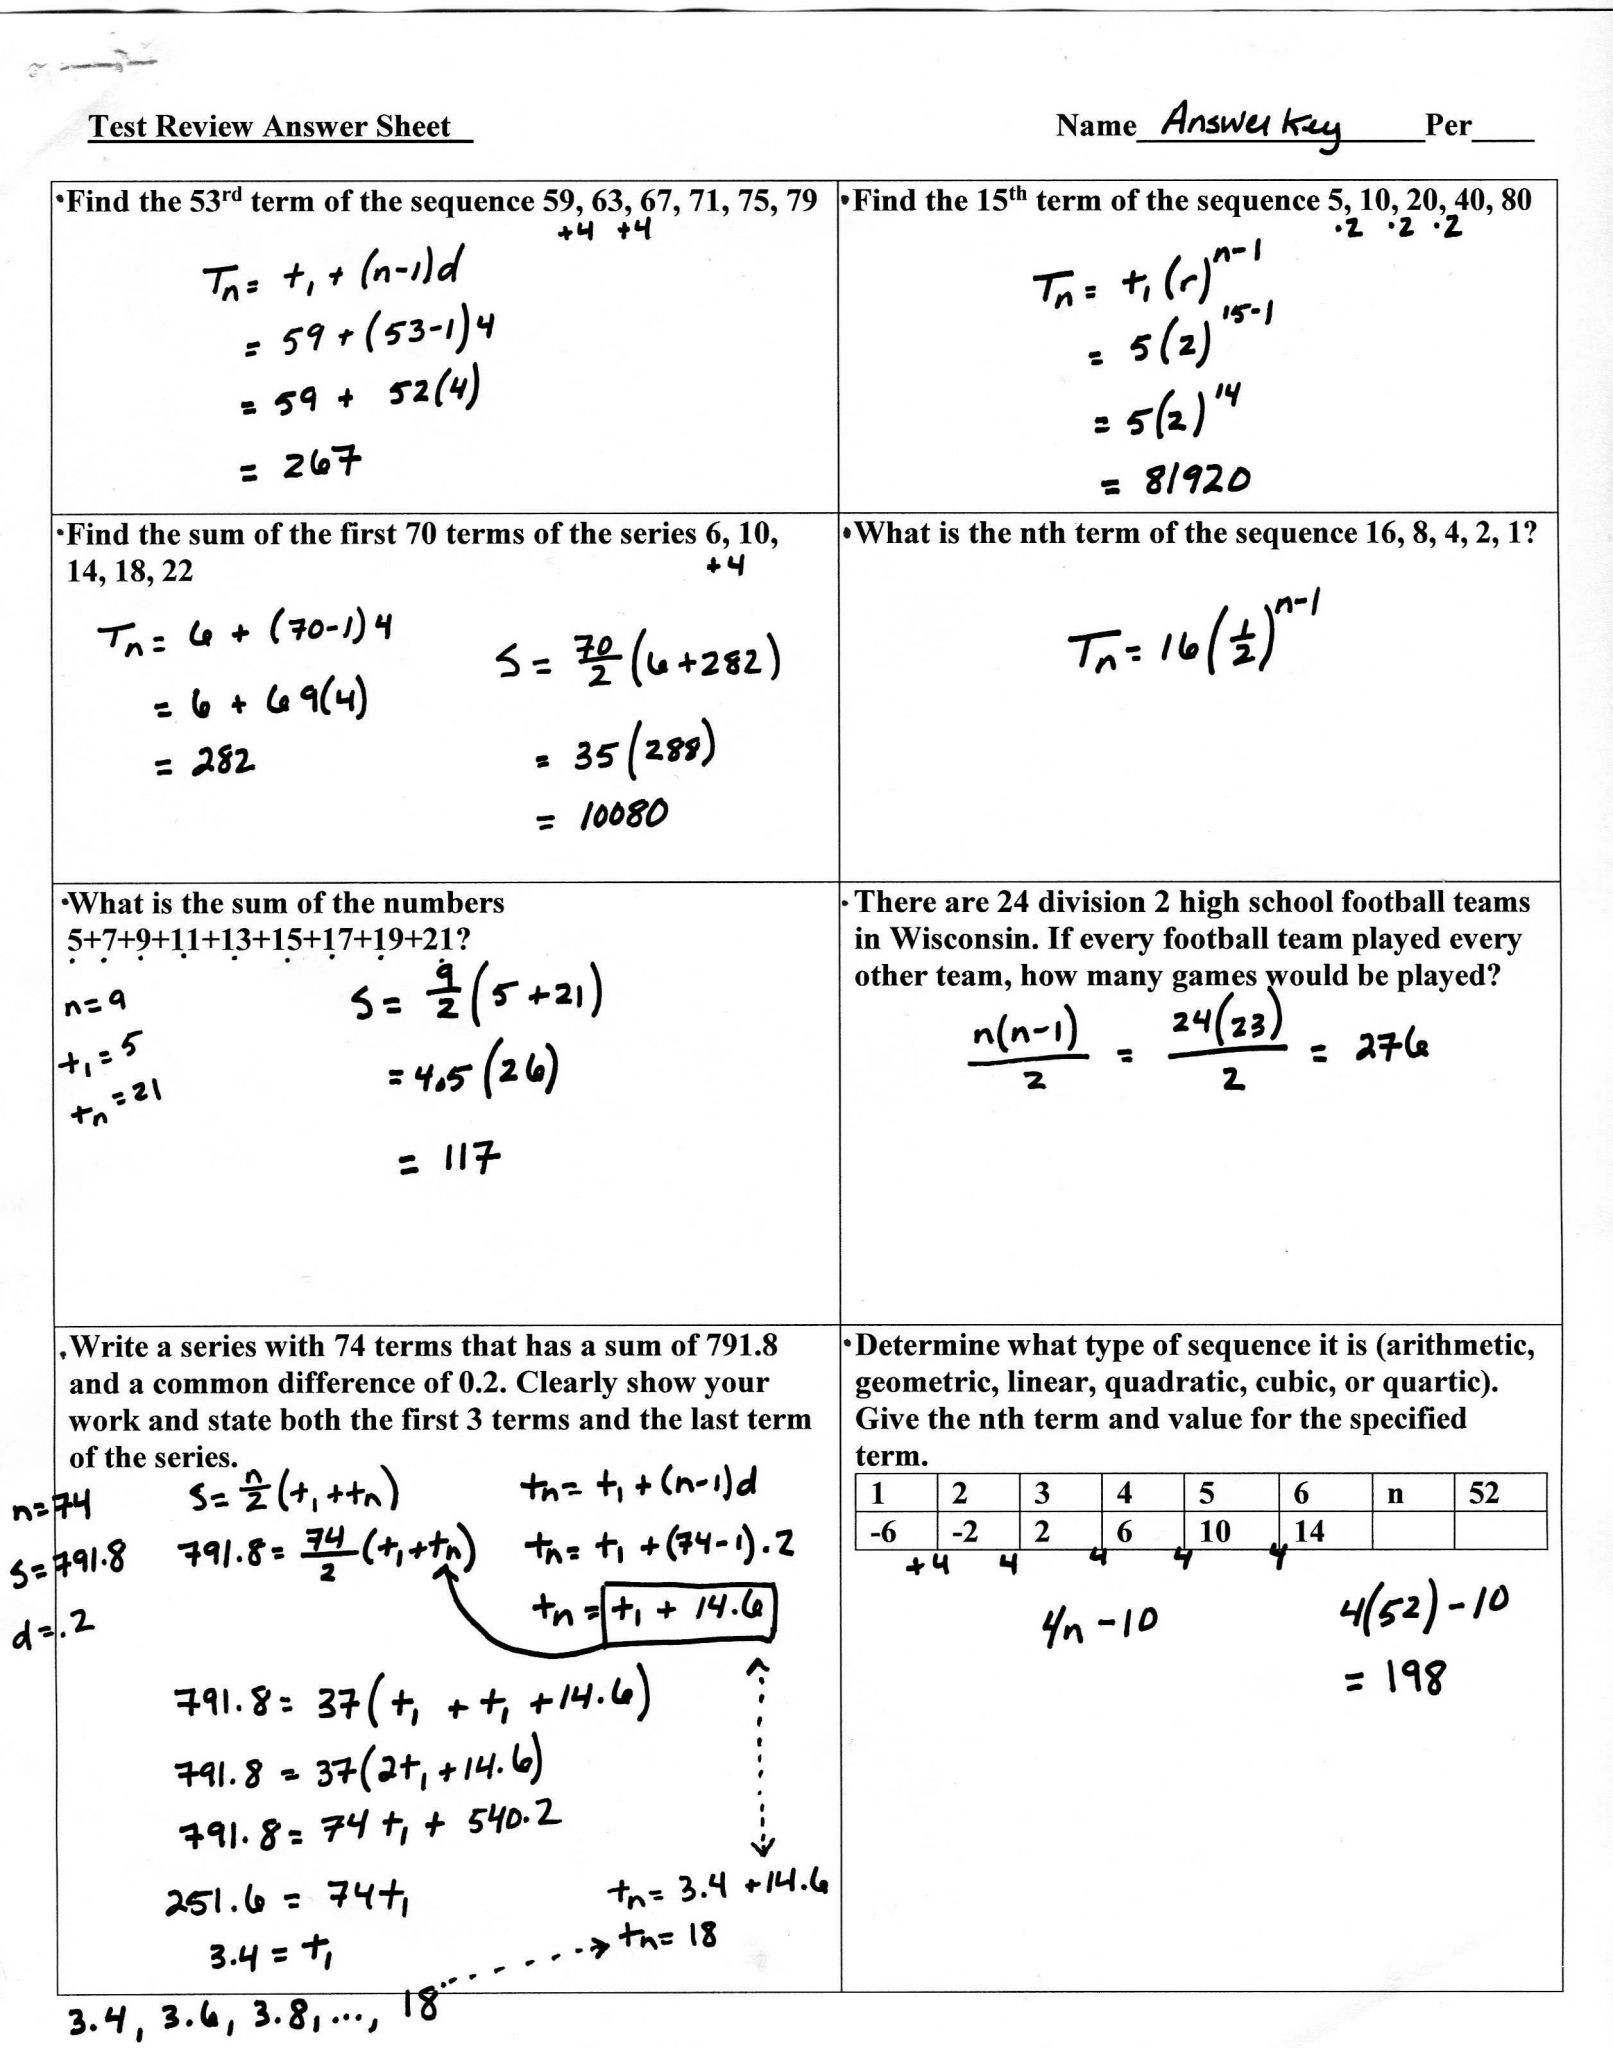 Geometric and Arithmetic Sequence Worksheet Graphing Sequences Worksheet